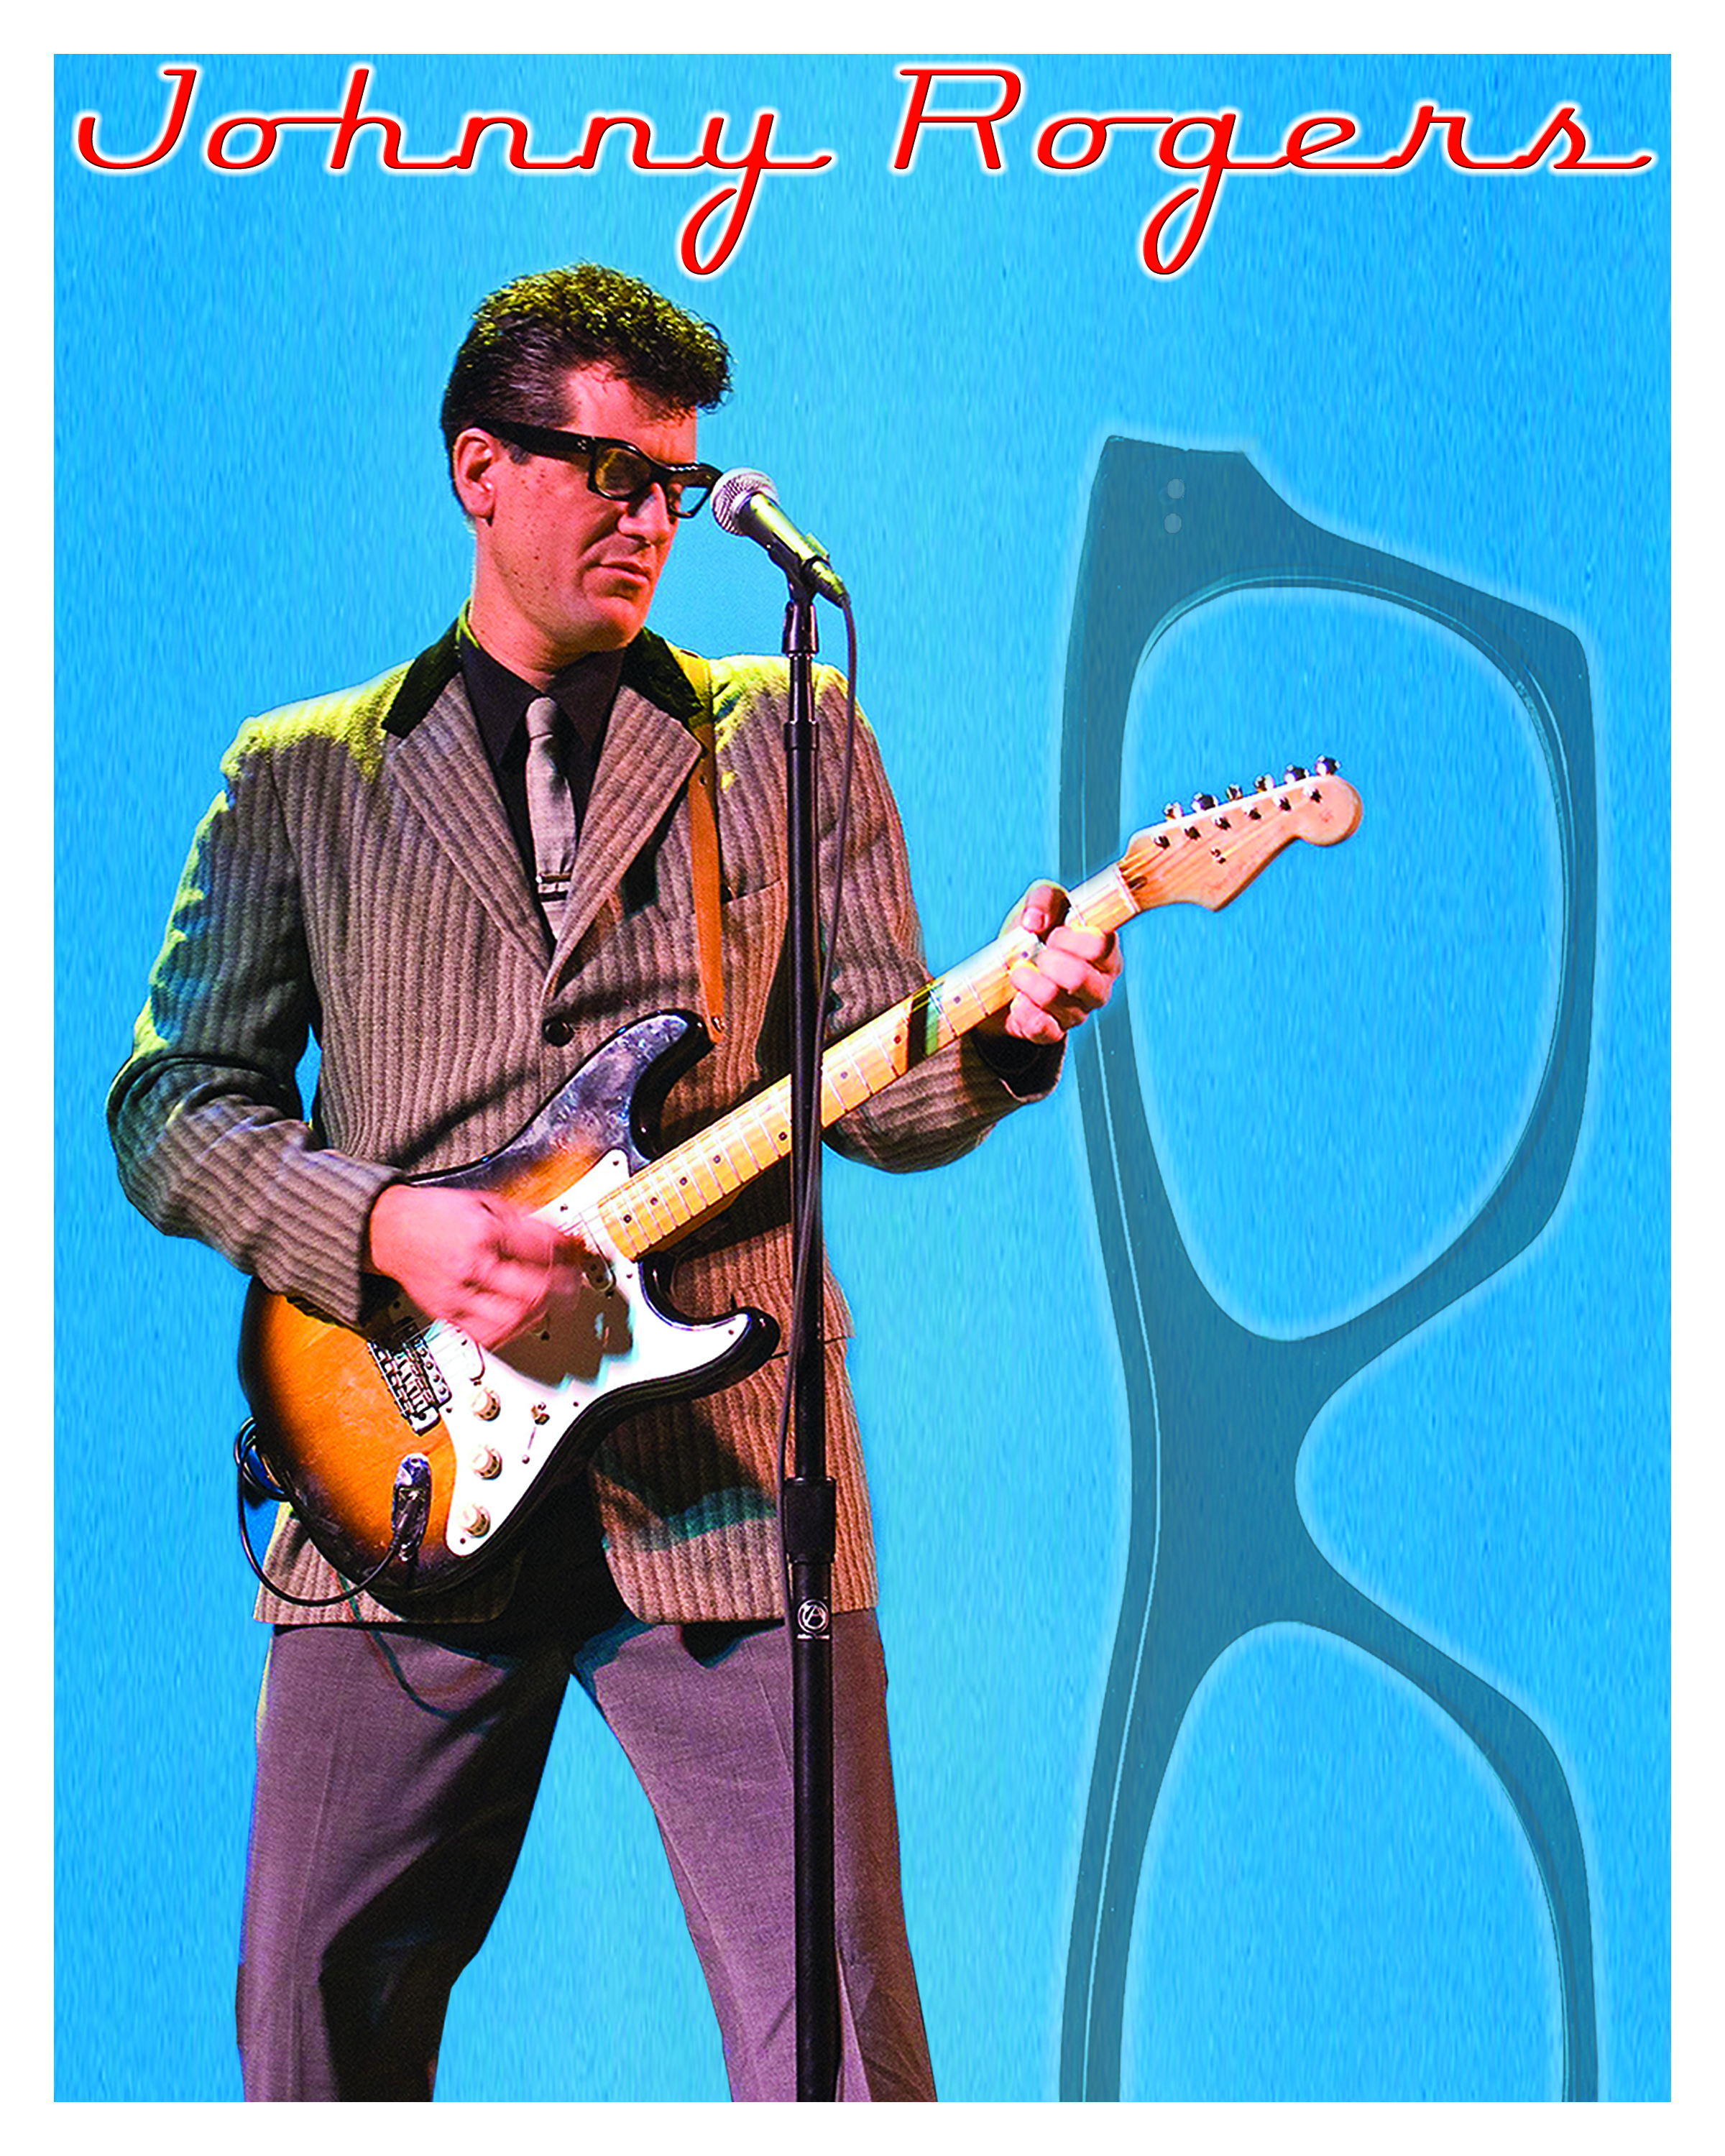 Tribute to Buddy Holly, Roy Orbison, and Other ROCK LEGENDS with entertainer extraordinaire JOHNNY ROGERS!!!